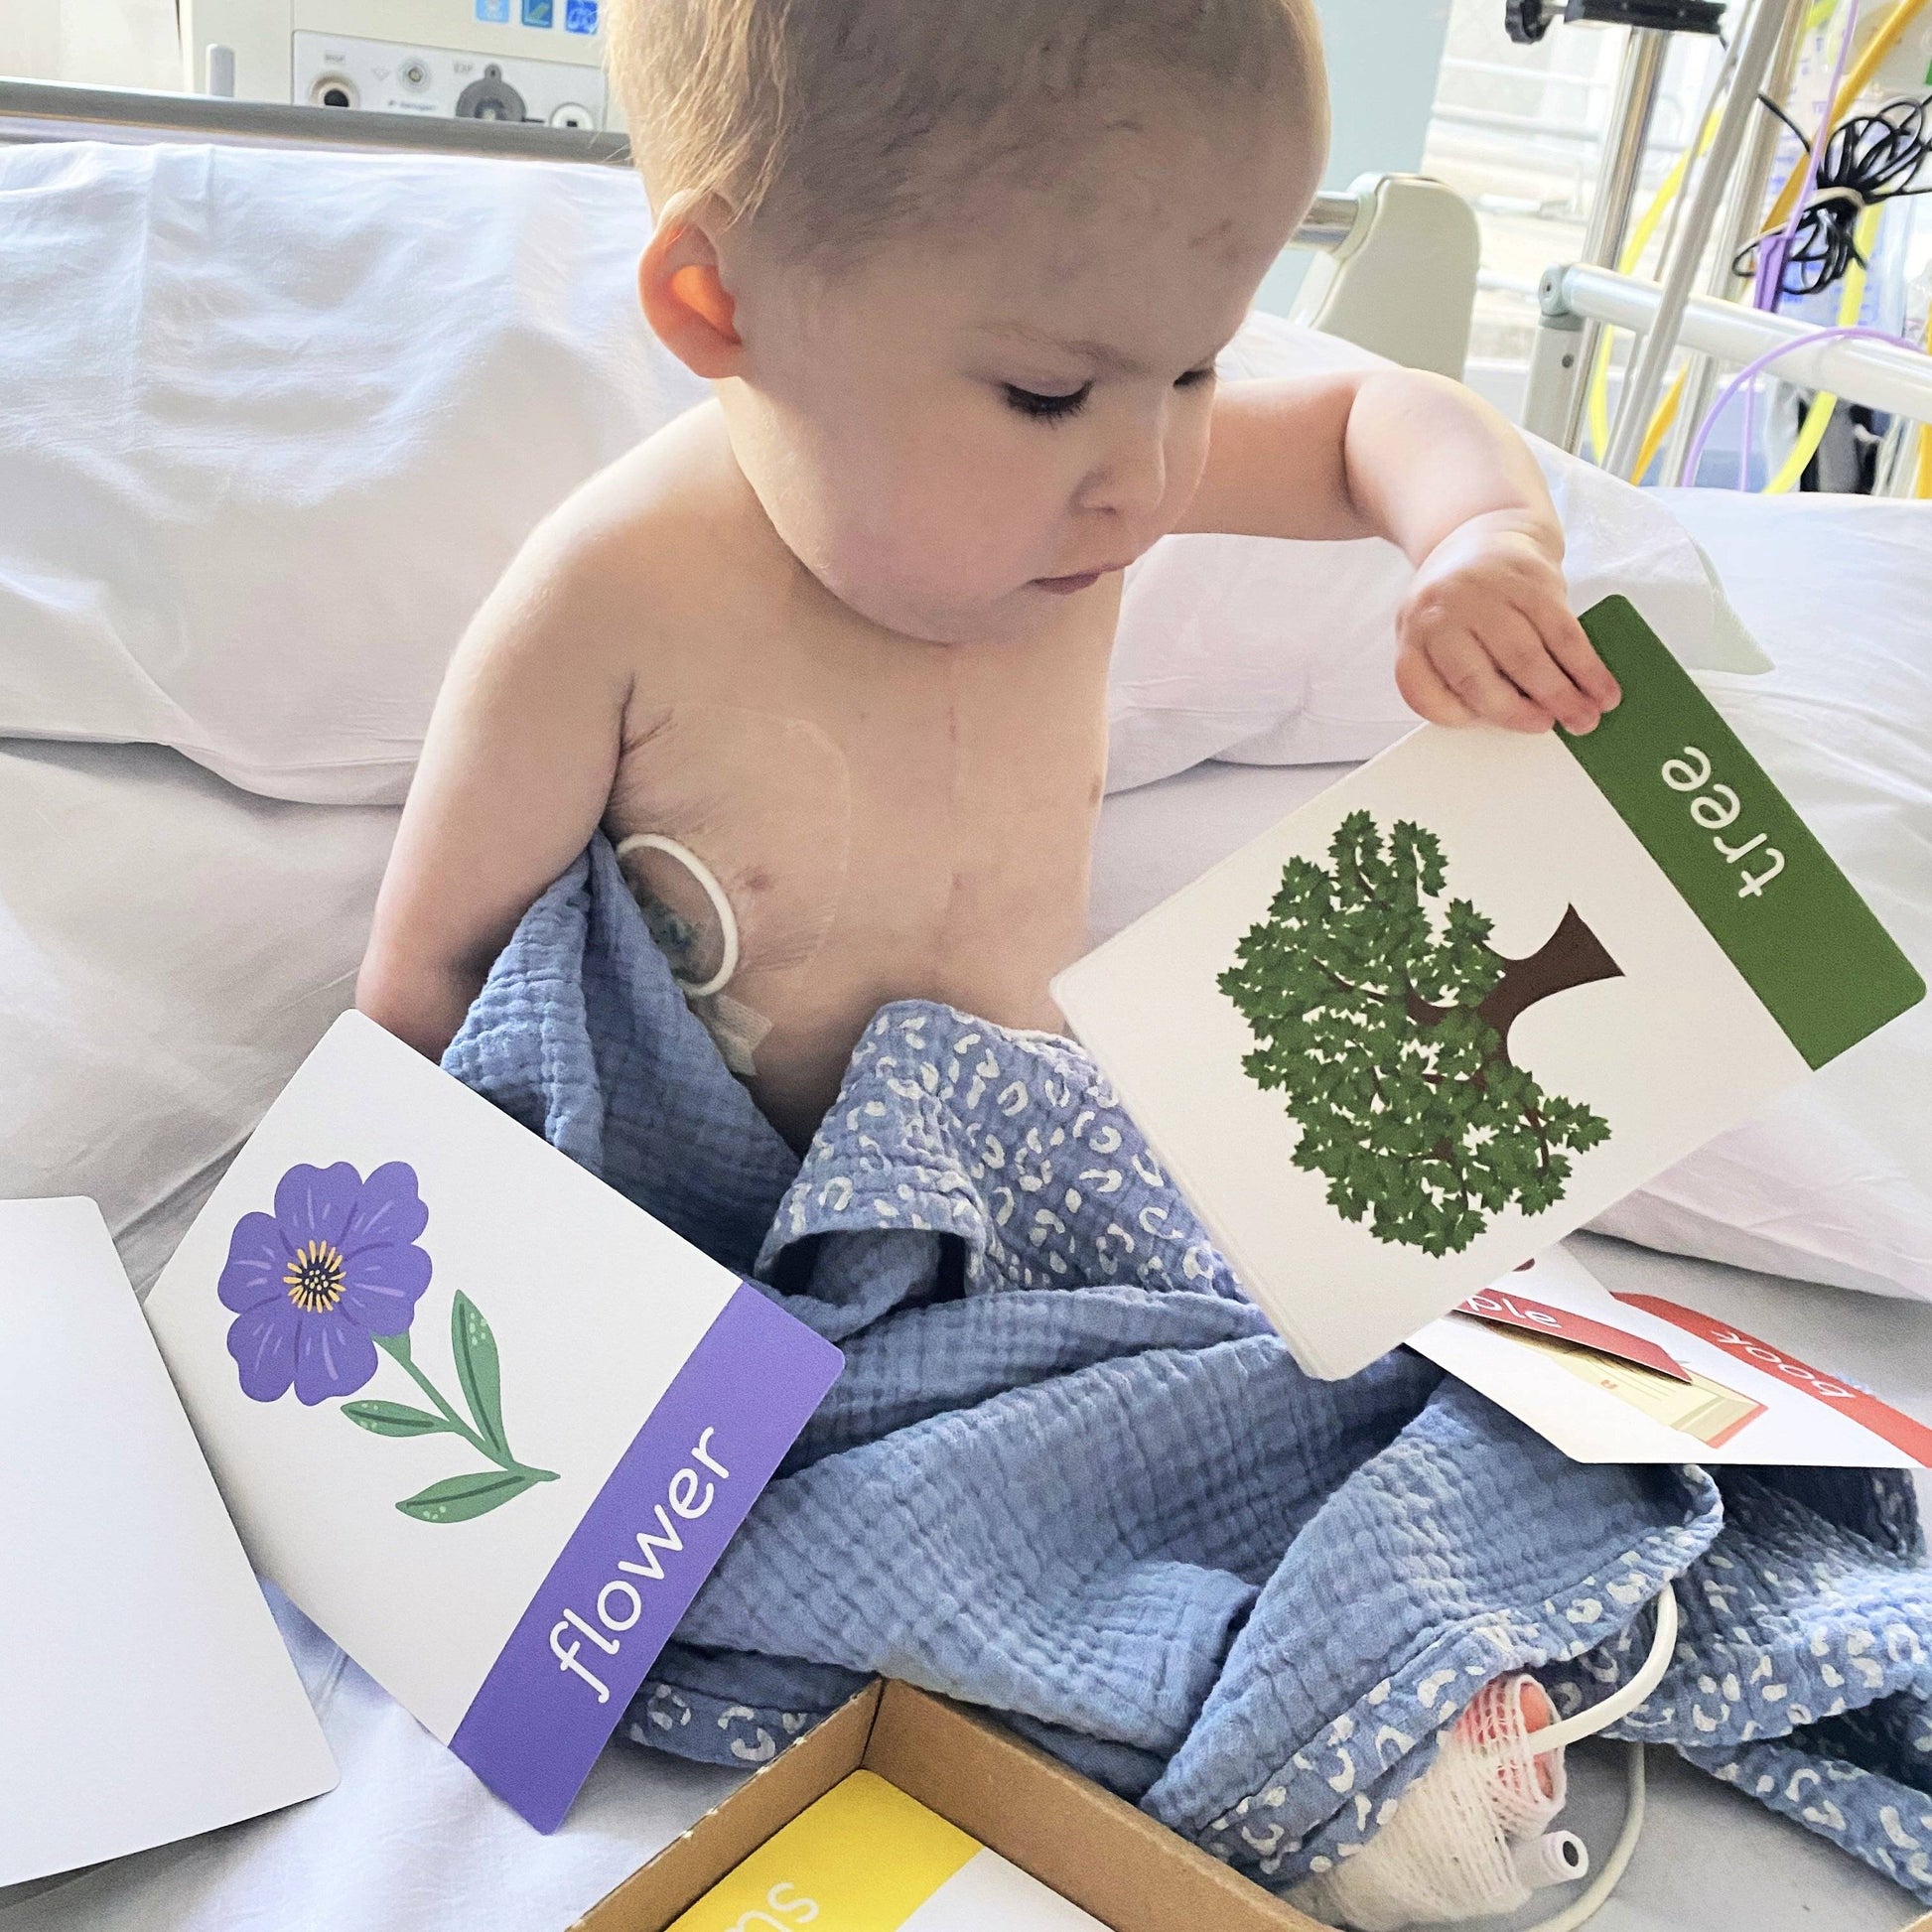 First Words Flashcards-Little Boo Learning-First Words,Flashcards,RMHC,Ronald McDonald House Charities